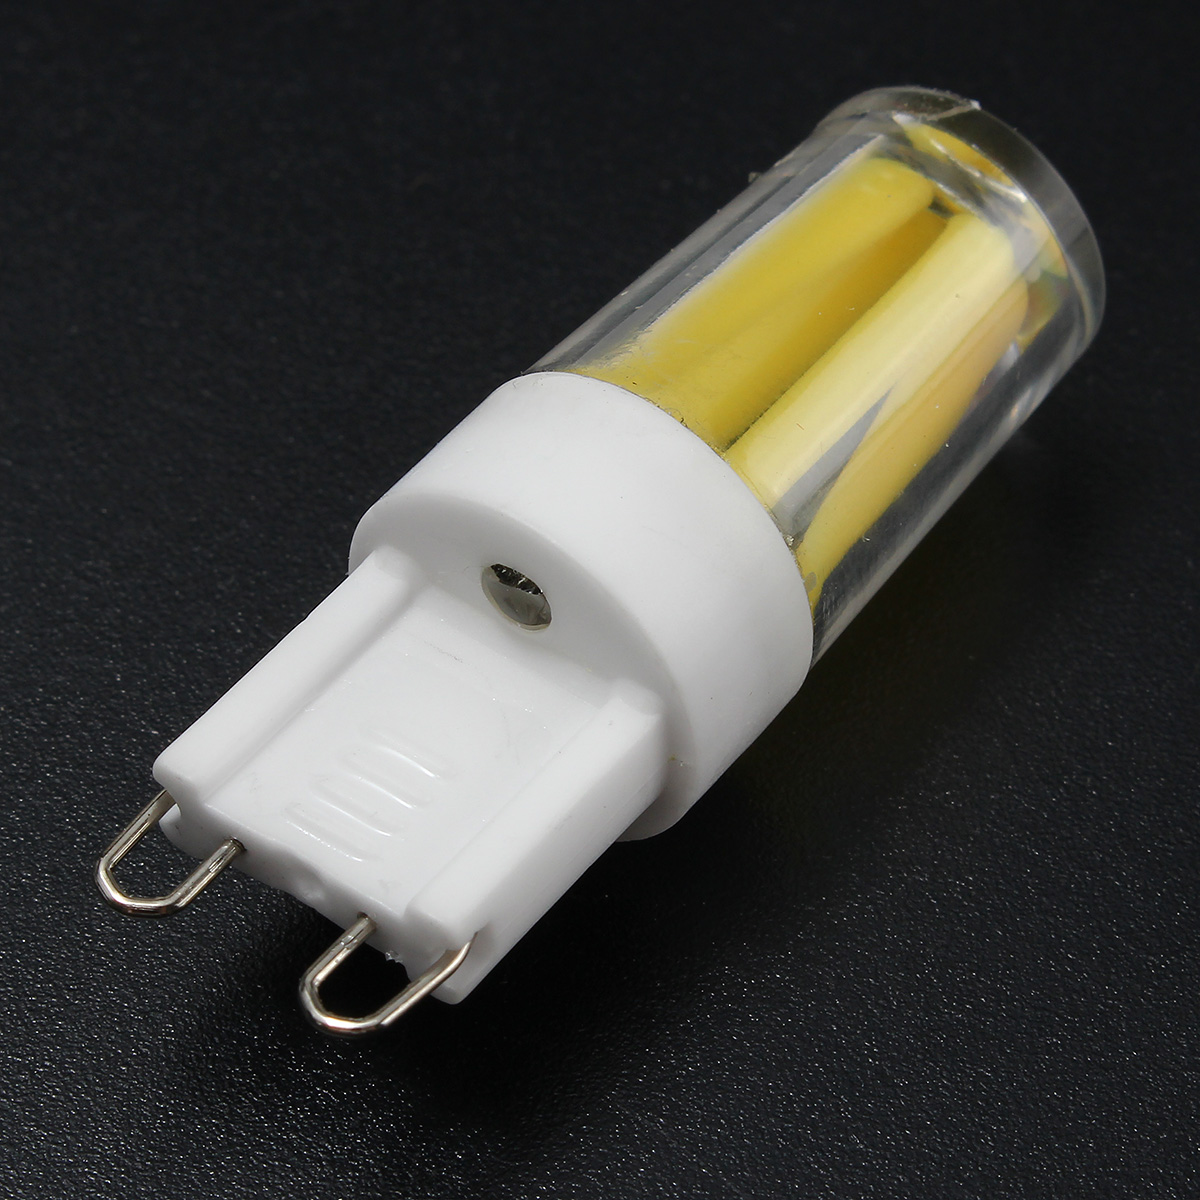 2W-G9-Dimmable-LED-Pure-White-Warm-White-Corn-Bulb-Silicone-Crystal-COB-Lamp-Light-AC-220V-1292383-6